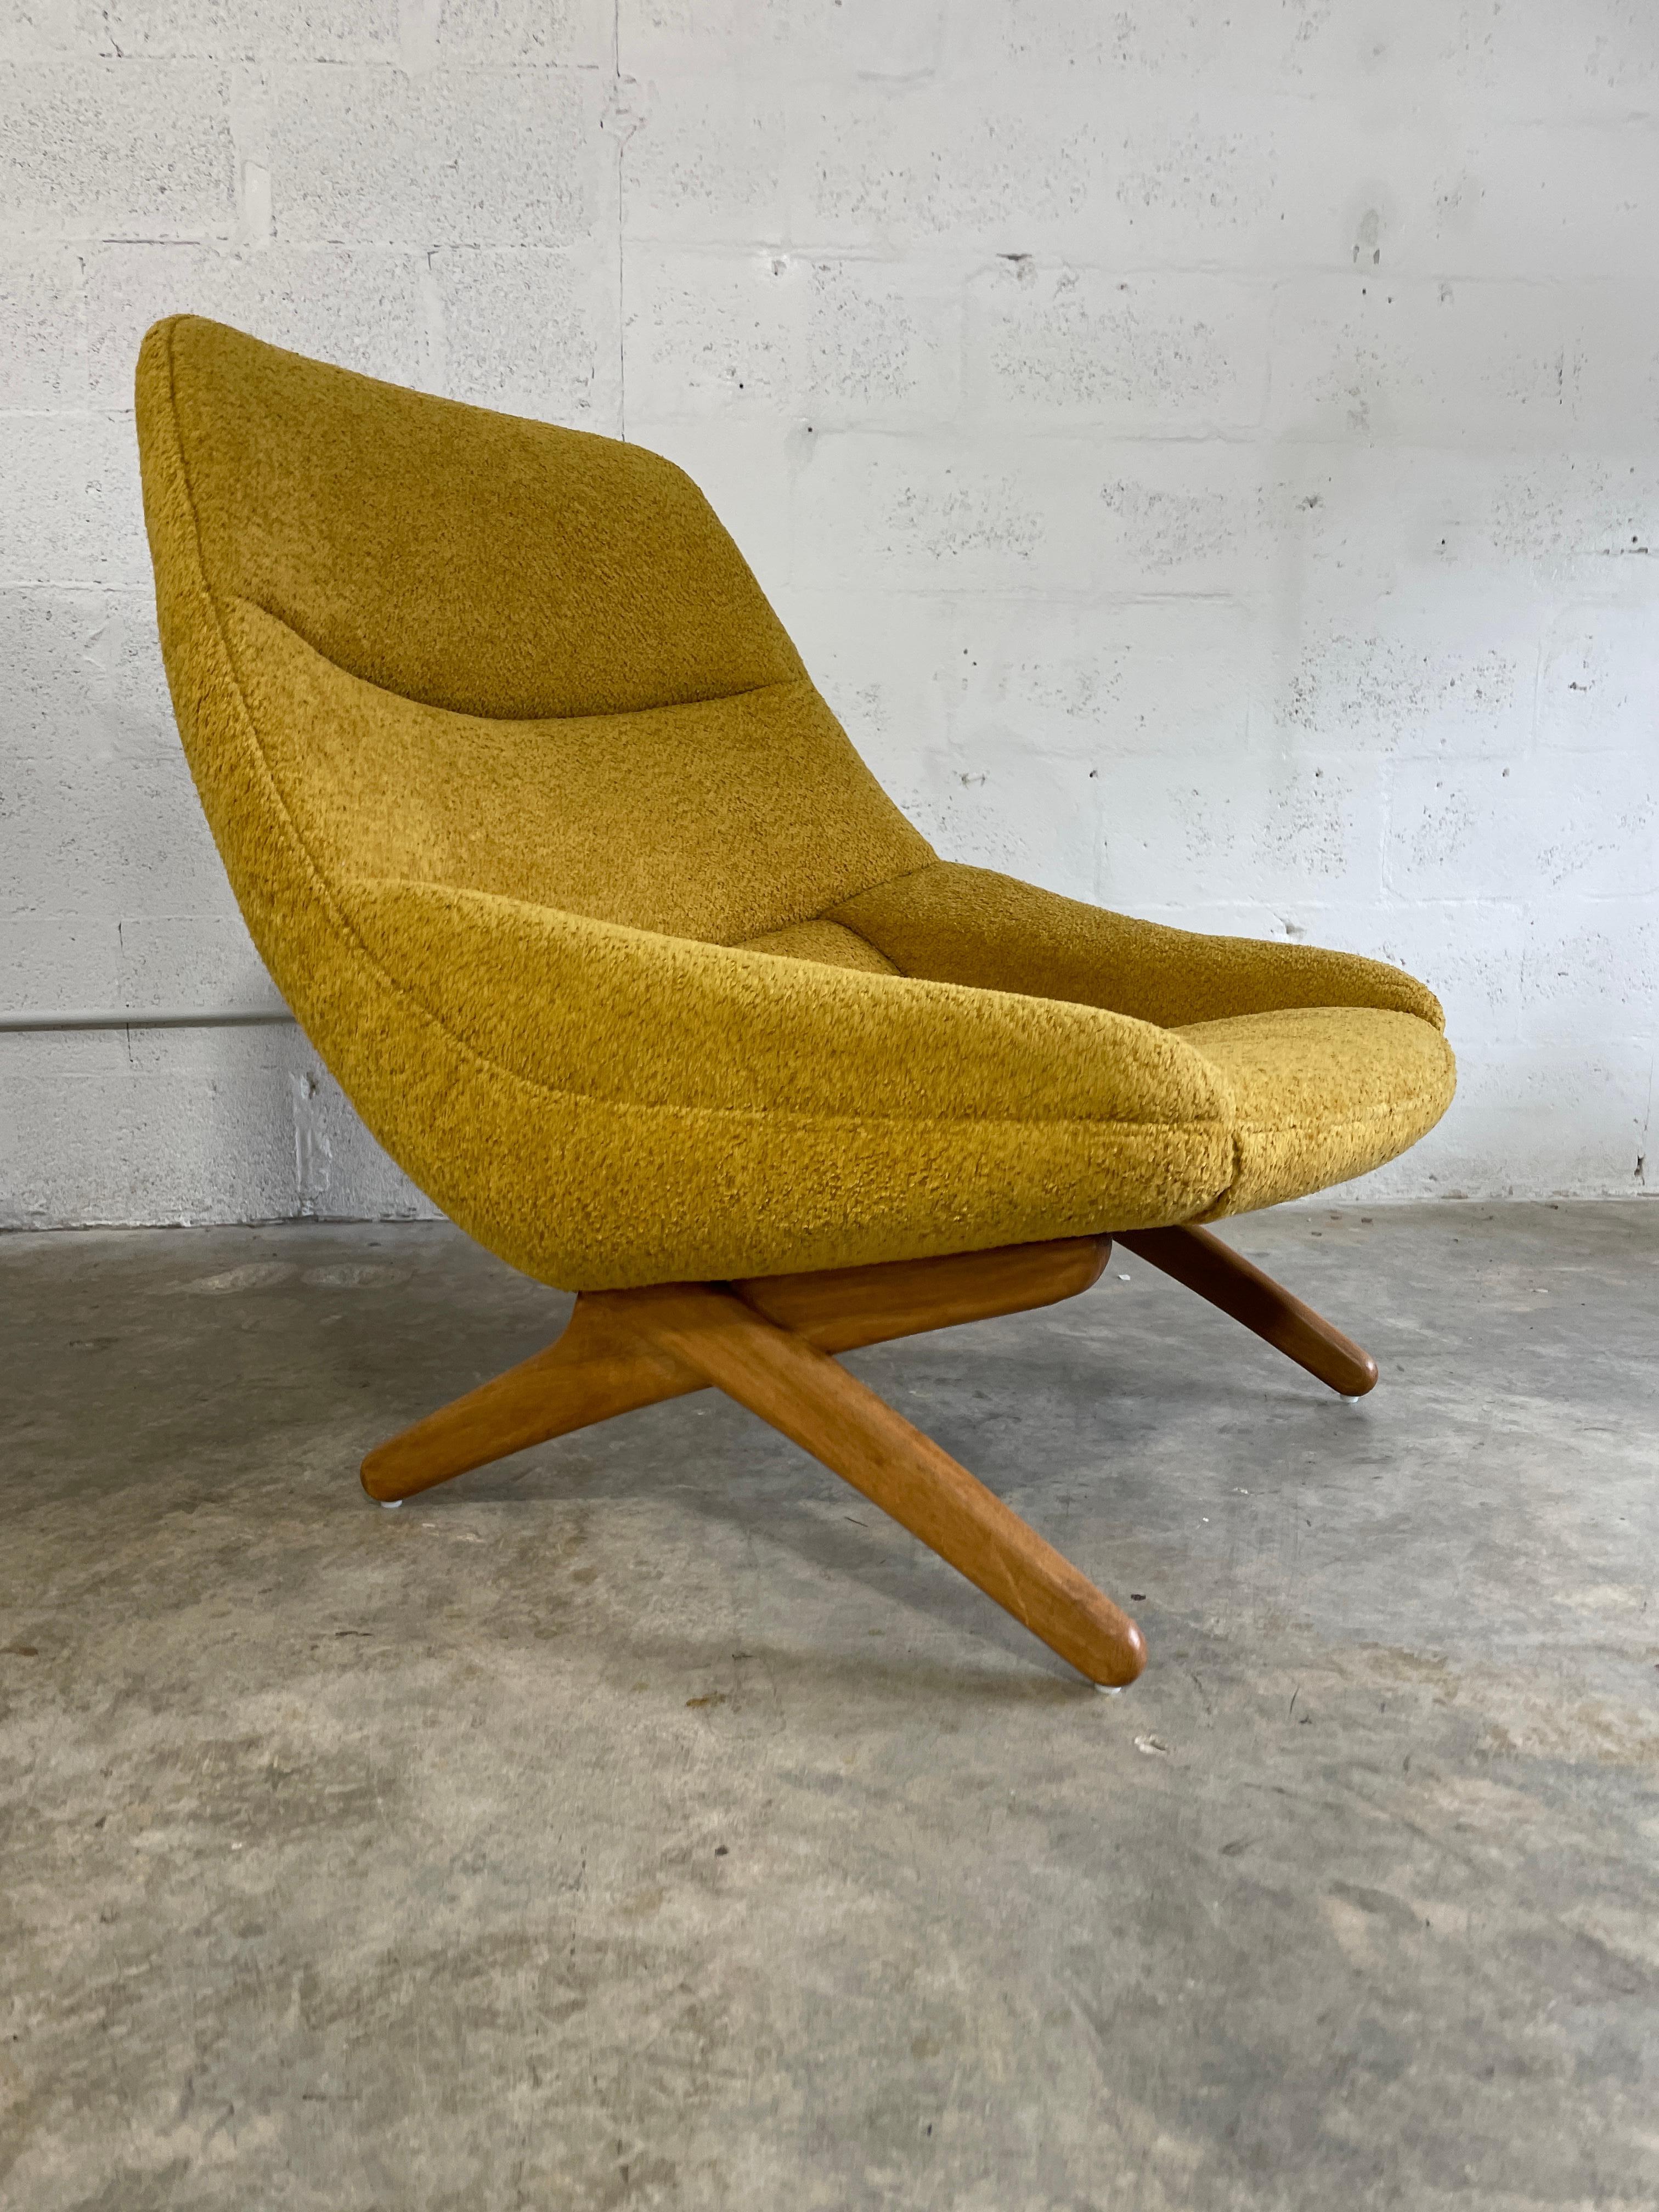 Illum Wikkelso Model Ml91 Danish Modern Lounge Chair In Good Condition For Sale In Fort Lauderdale, FL